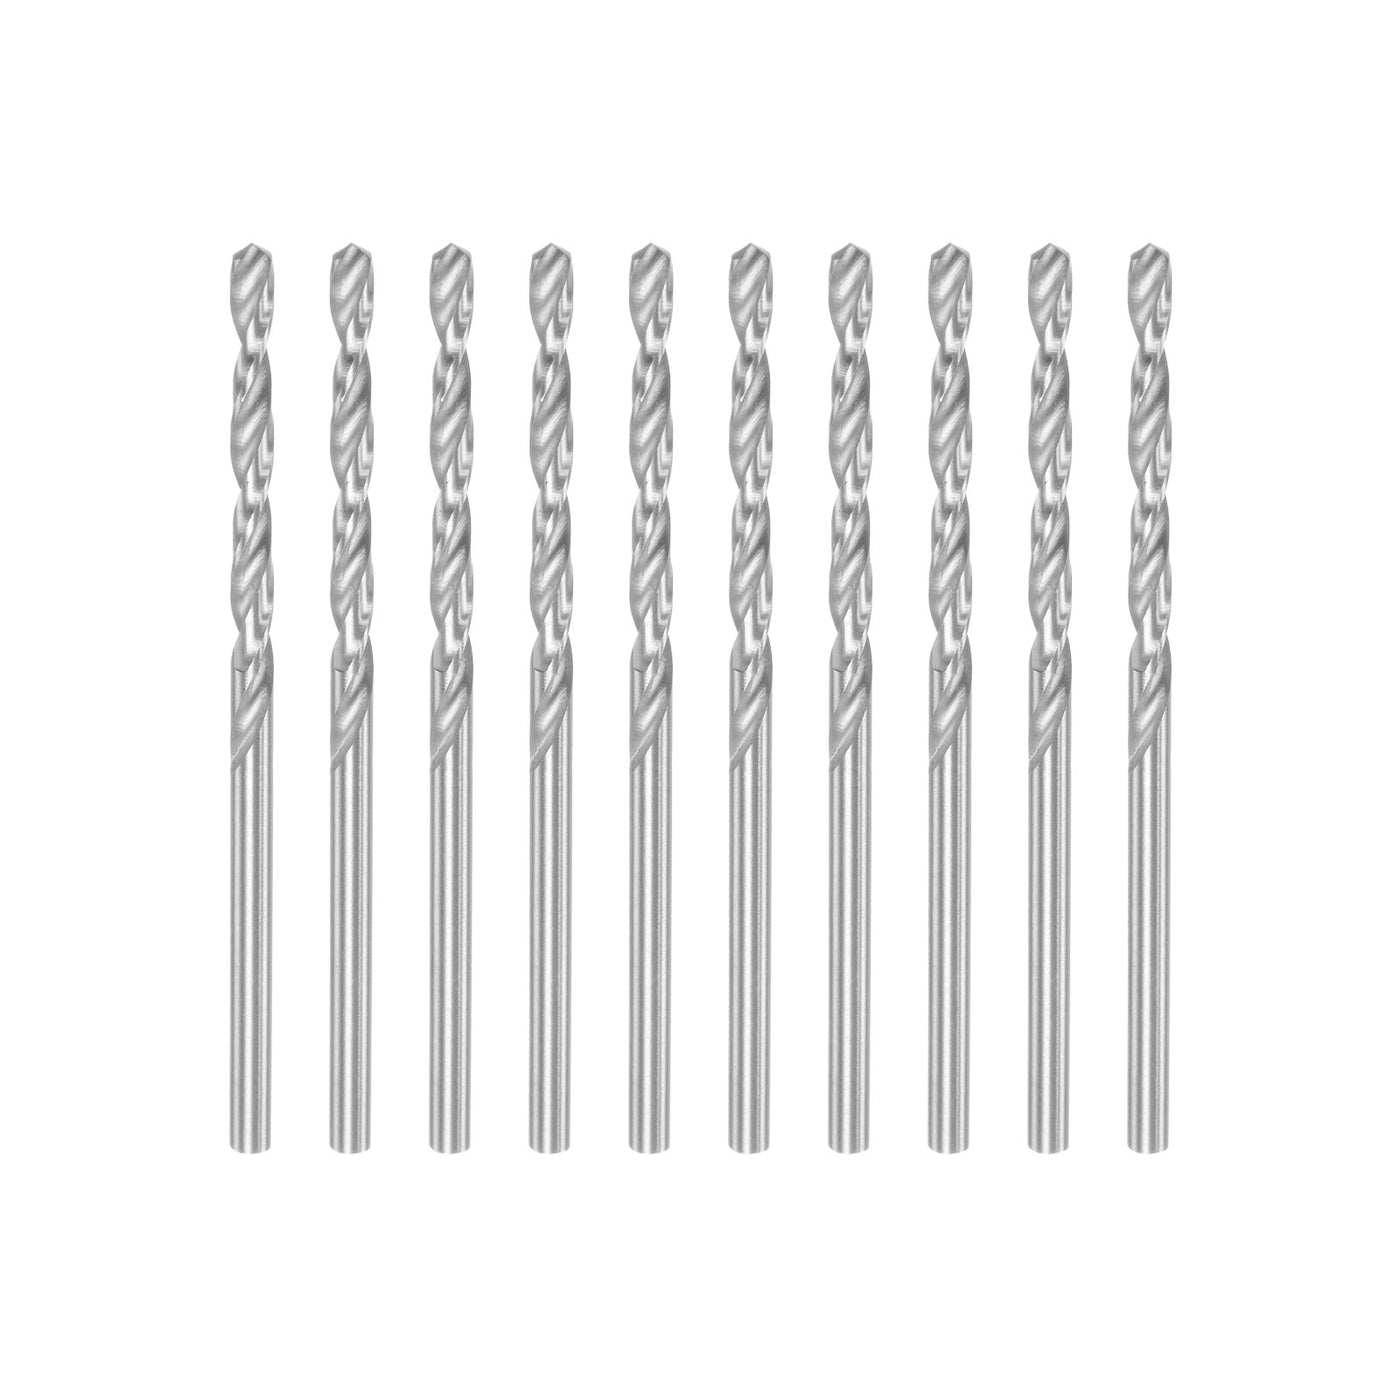 uxcell Uxcell 10 Pcs 2.8mm High Speed Steel Drill Bits, Fully Ground 60mm Length Drill Bit